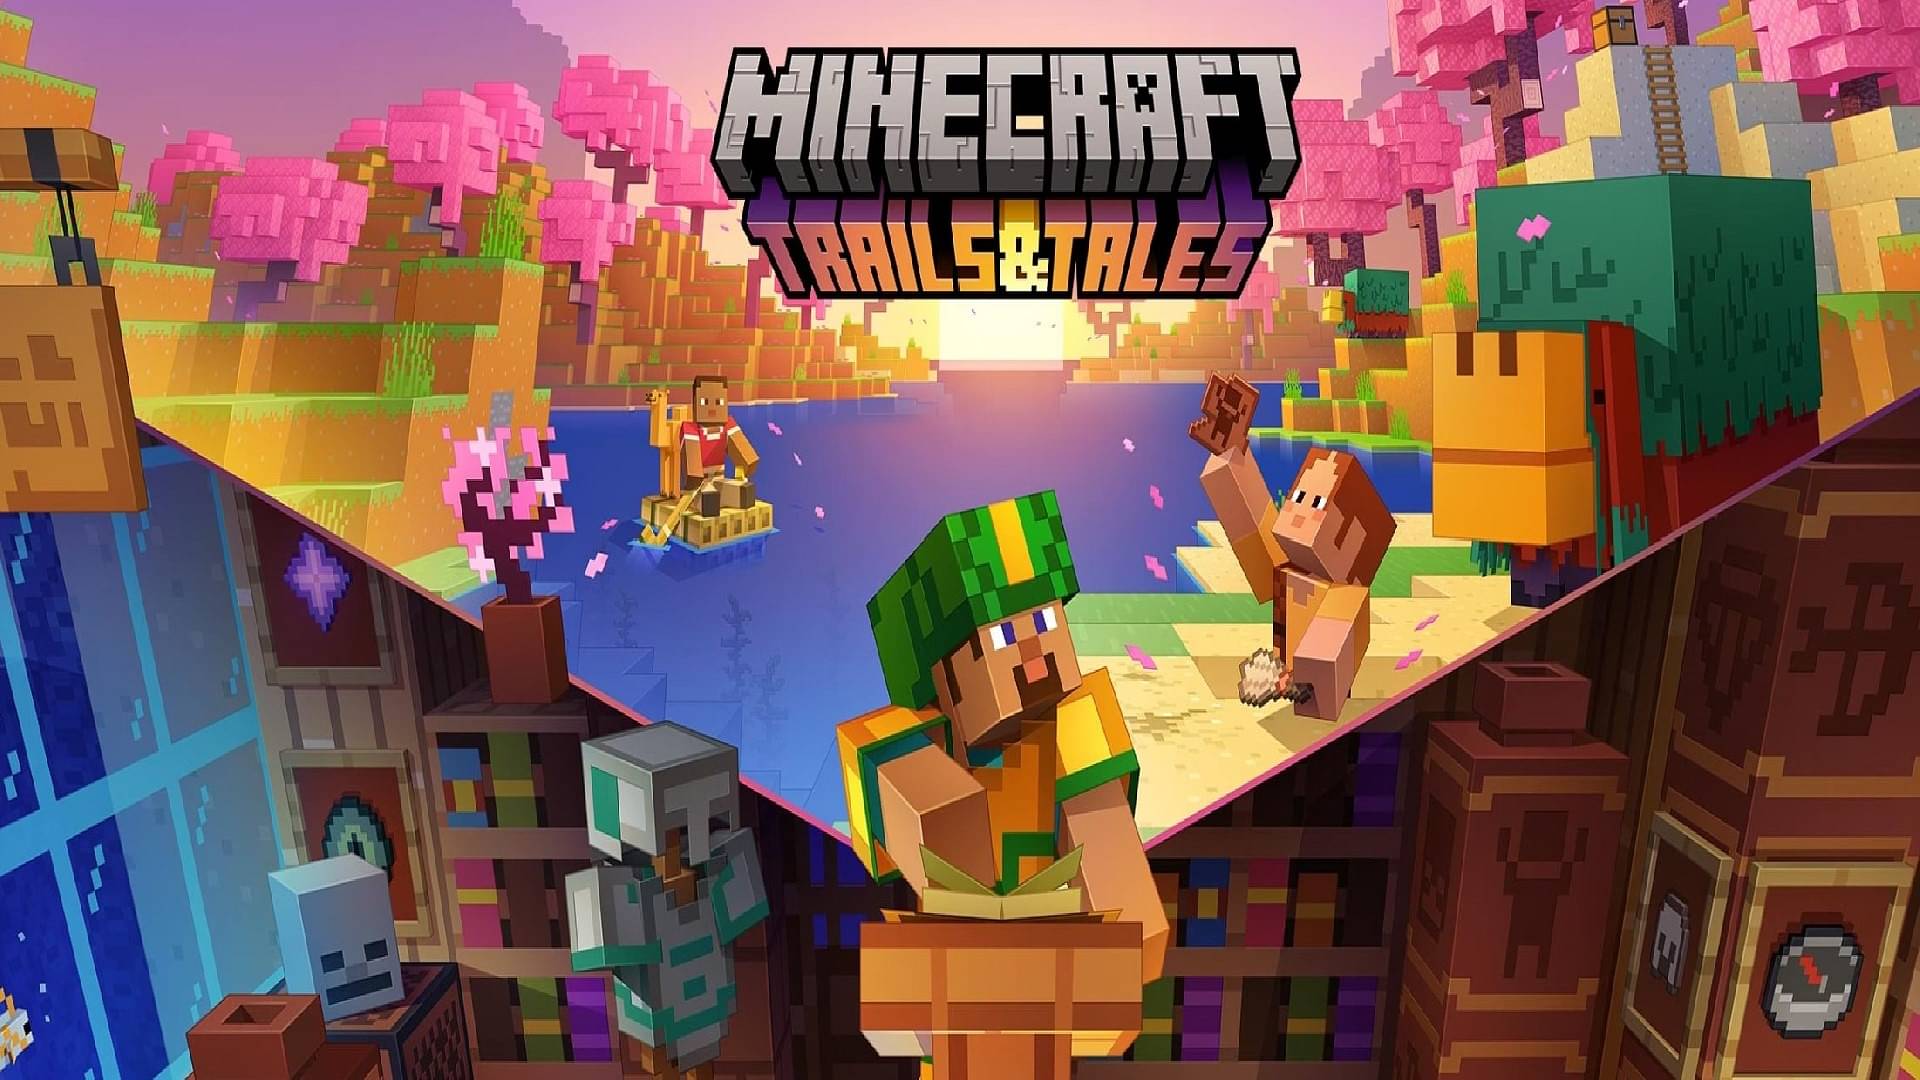 An Image of the Feature Cover of the Latest Trails and Tales Minecraft Update